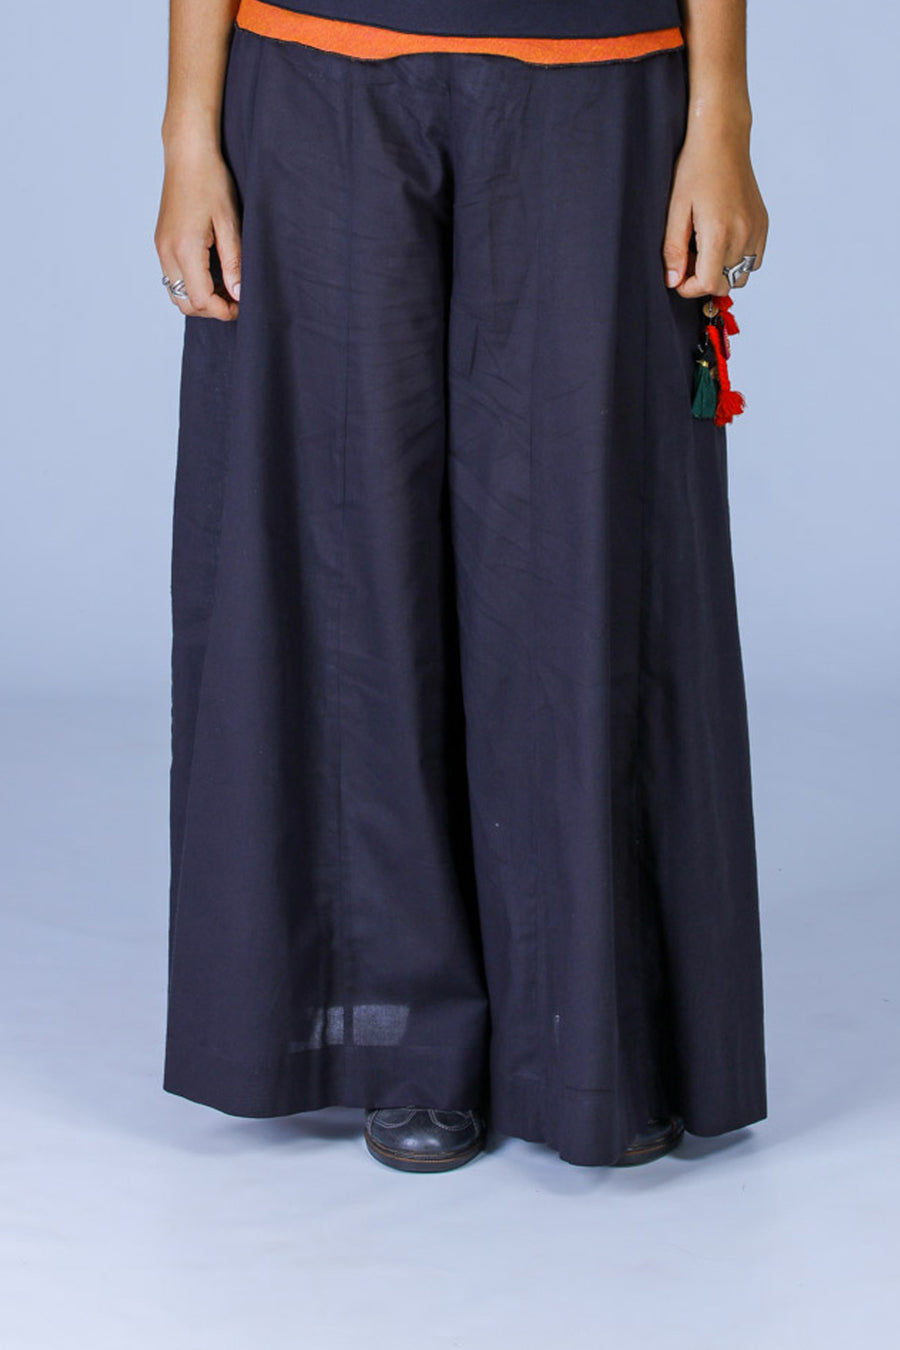 Convertible Maxi Skirt Palazzo Pants in Charoal / Super Soft Cotton /  Pockets / Fits Plus Size - Etsy